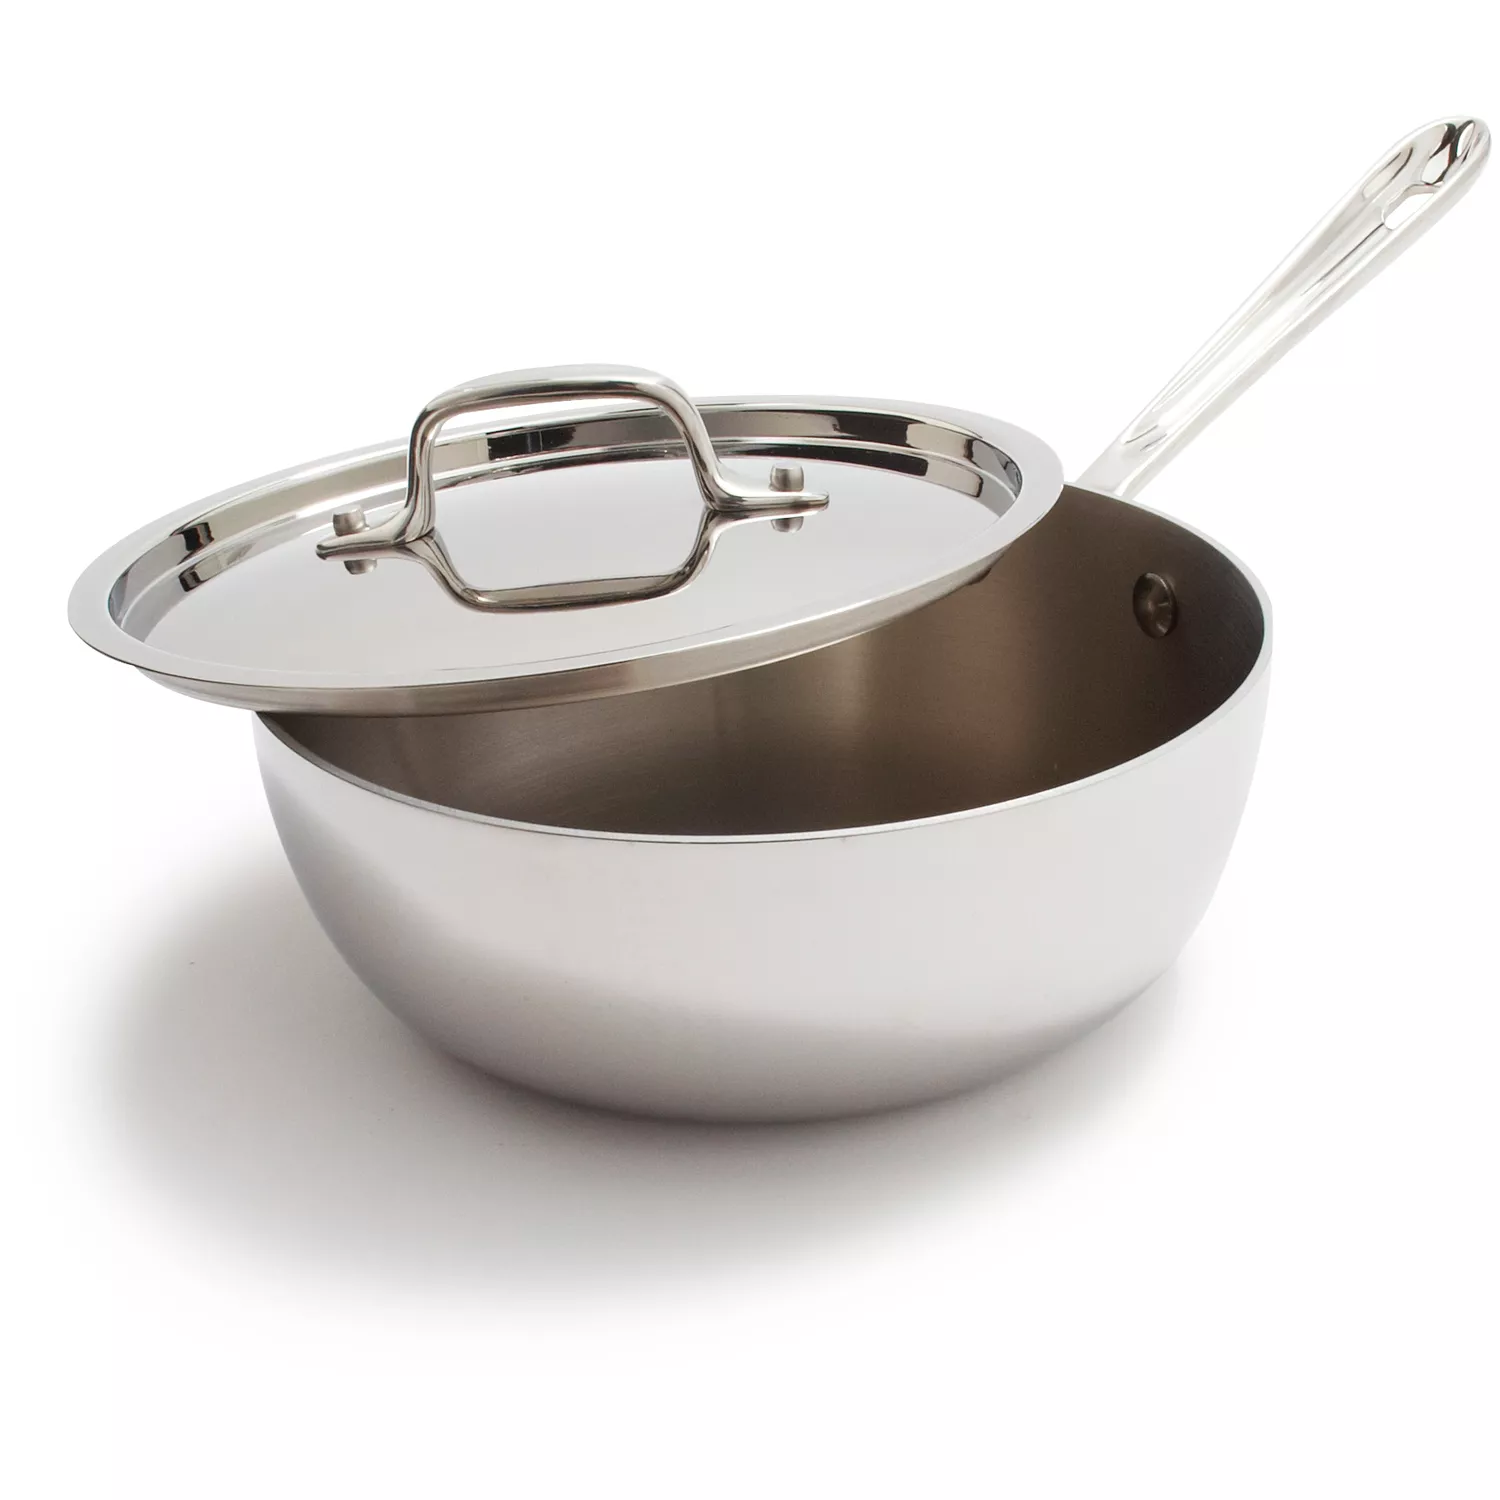 All-Clad All Clad Stainless Steel 3 Quart Saucier Pan with Lid